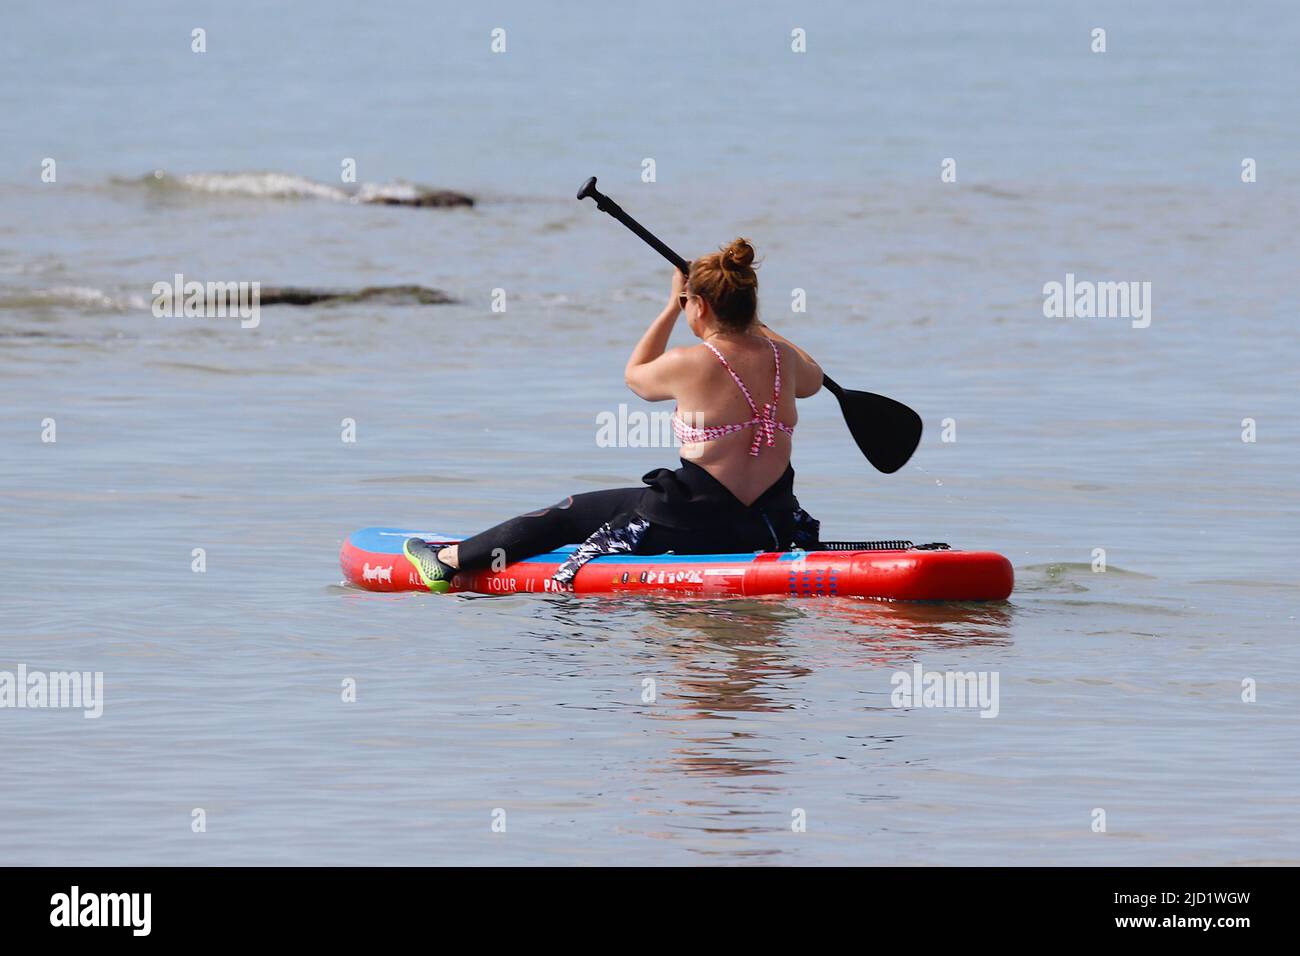 Hastings, East Sussex, UK. 17 Jun, 2022. UK Weather: Very hot and sunny at the seaside town of Hastings in East Sussex as Brits enjoy the very hot weather today that is expected to reach 34c in some parts of the UK. A paddle boarder enjoying the sunshine. Photo Credit: Paul Lawrenson /Alamy Live News Stock Photo